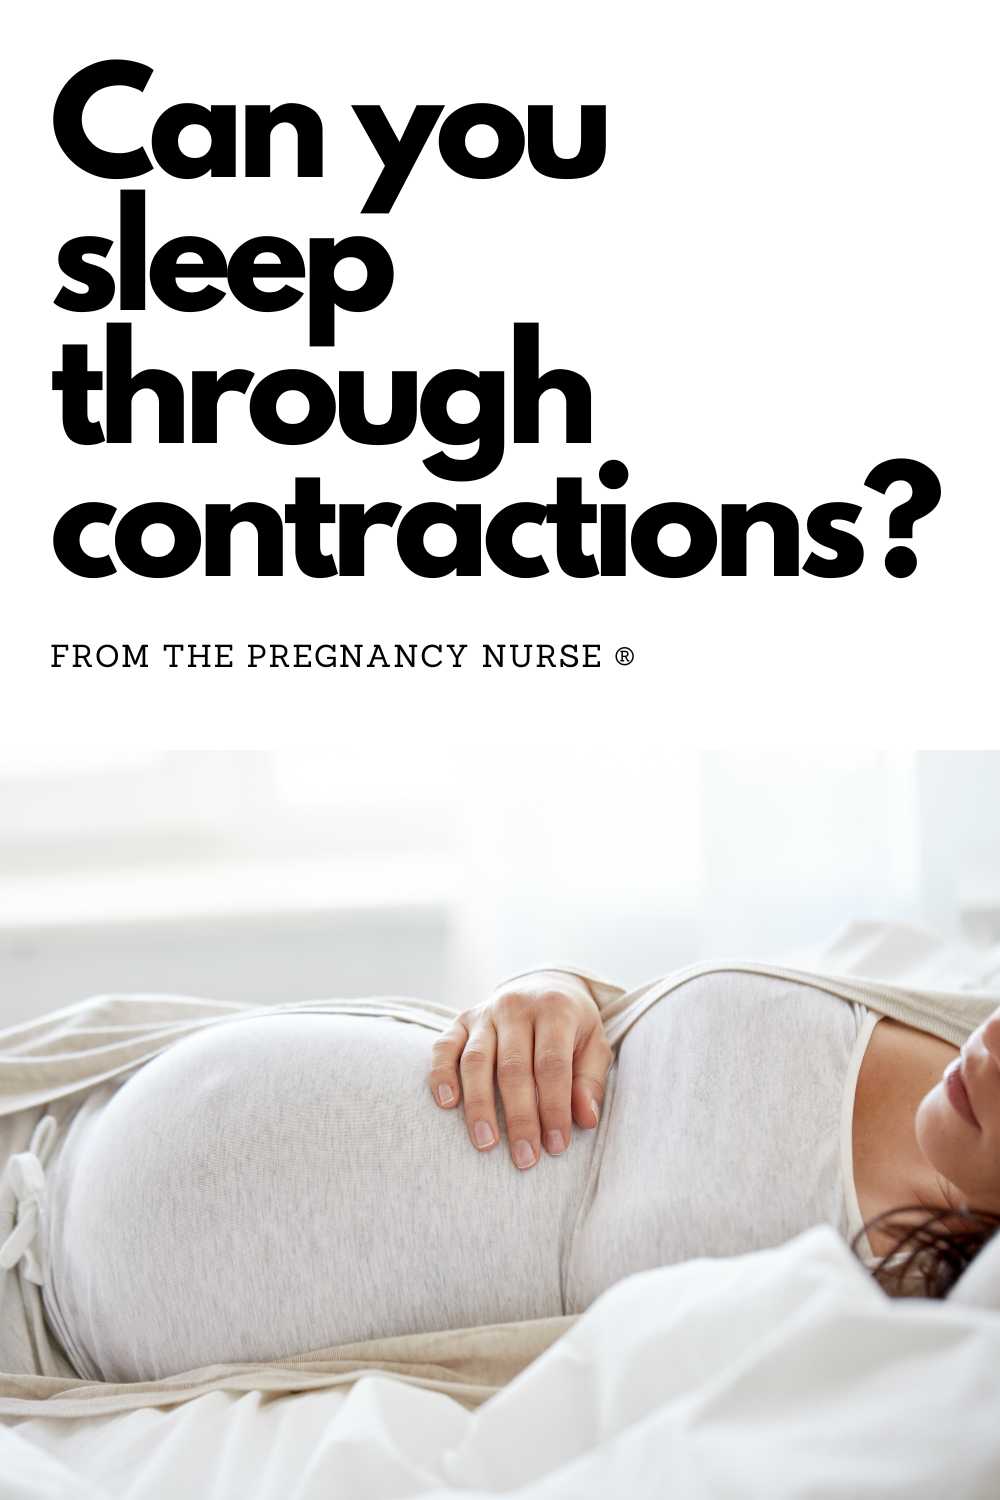 Did you know that sleeping during early labor contractions is possible? But, isn't that dangerous for the baby? Can you miss your delivery? Get ready for a shocking revelation about sleep and labor. Say no to misconceptions and gain insights about this seldom-discussed aspect of labor from a seasoned labor and delivery nurse.